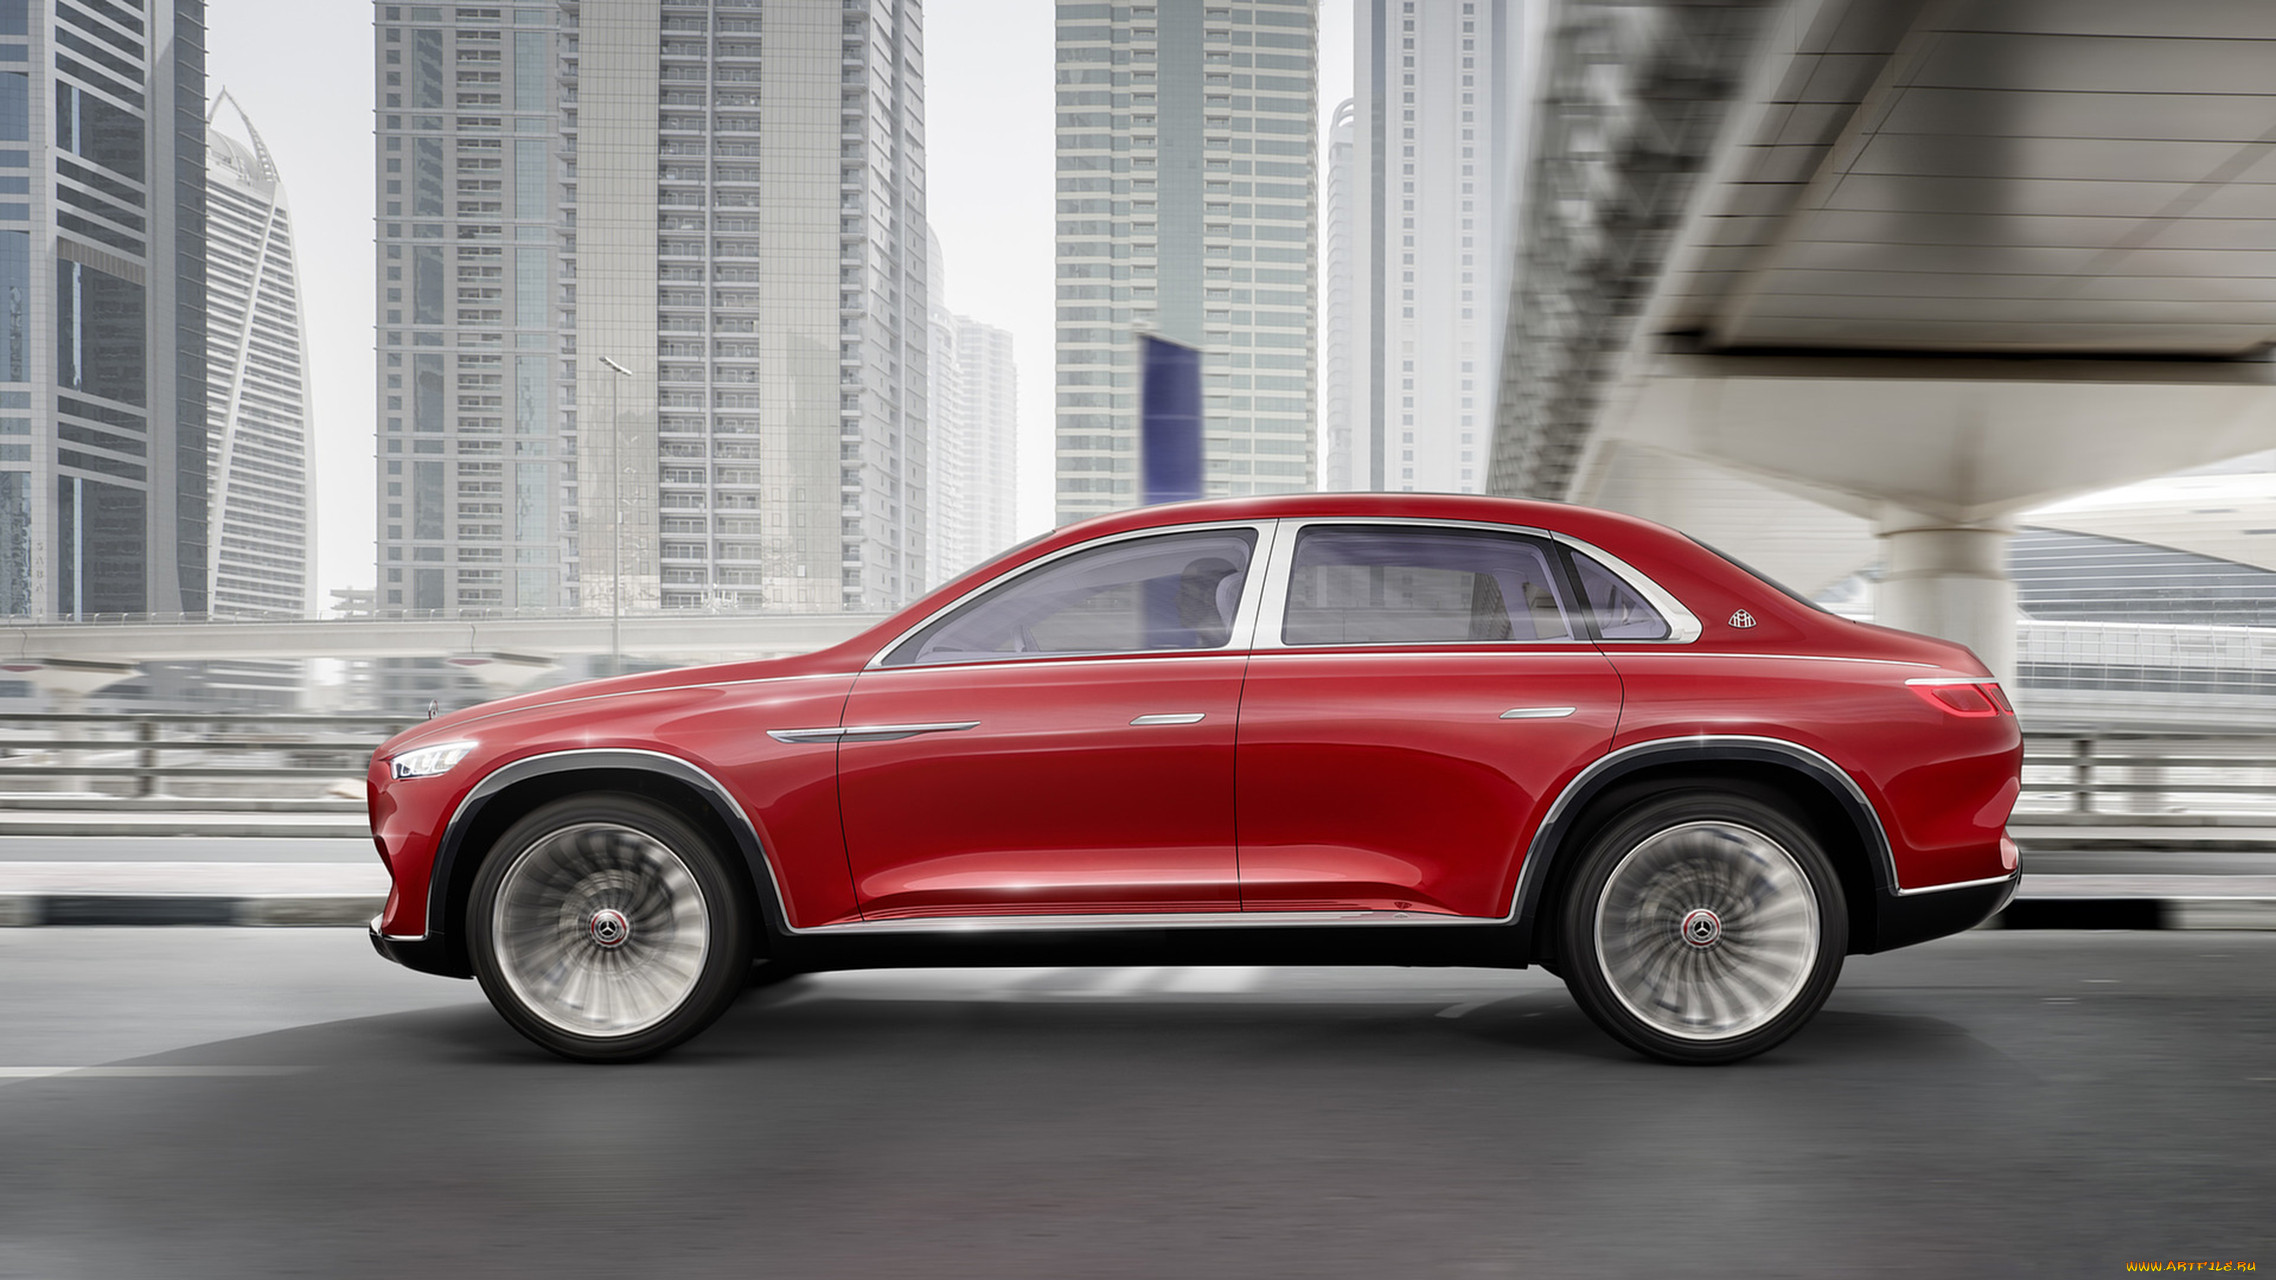 mercedes-maybach vision ultimate luxury suv concept 2018, , 3, luxury, ultimate, vision, mercedes-maybach, 2018, suv, concept